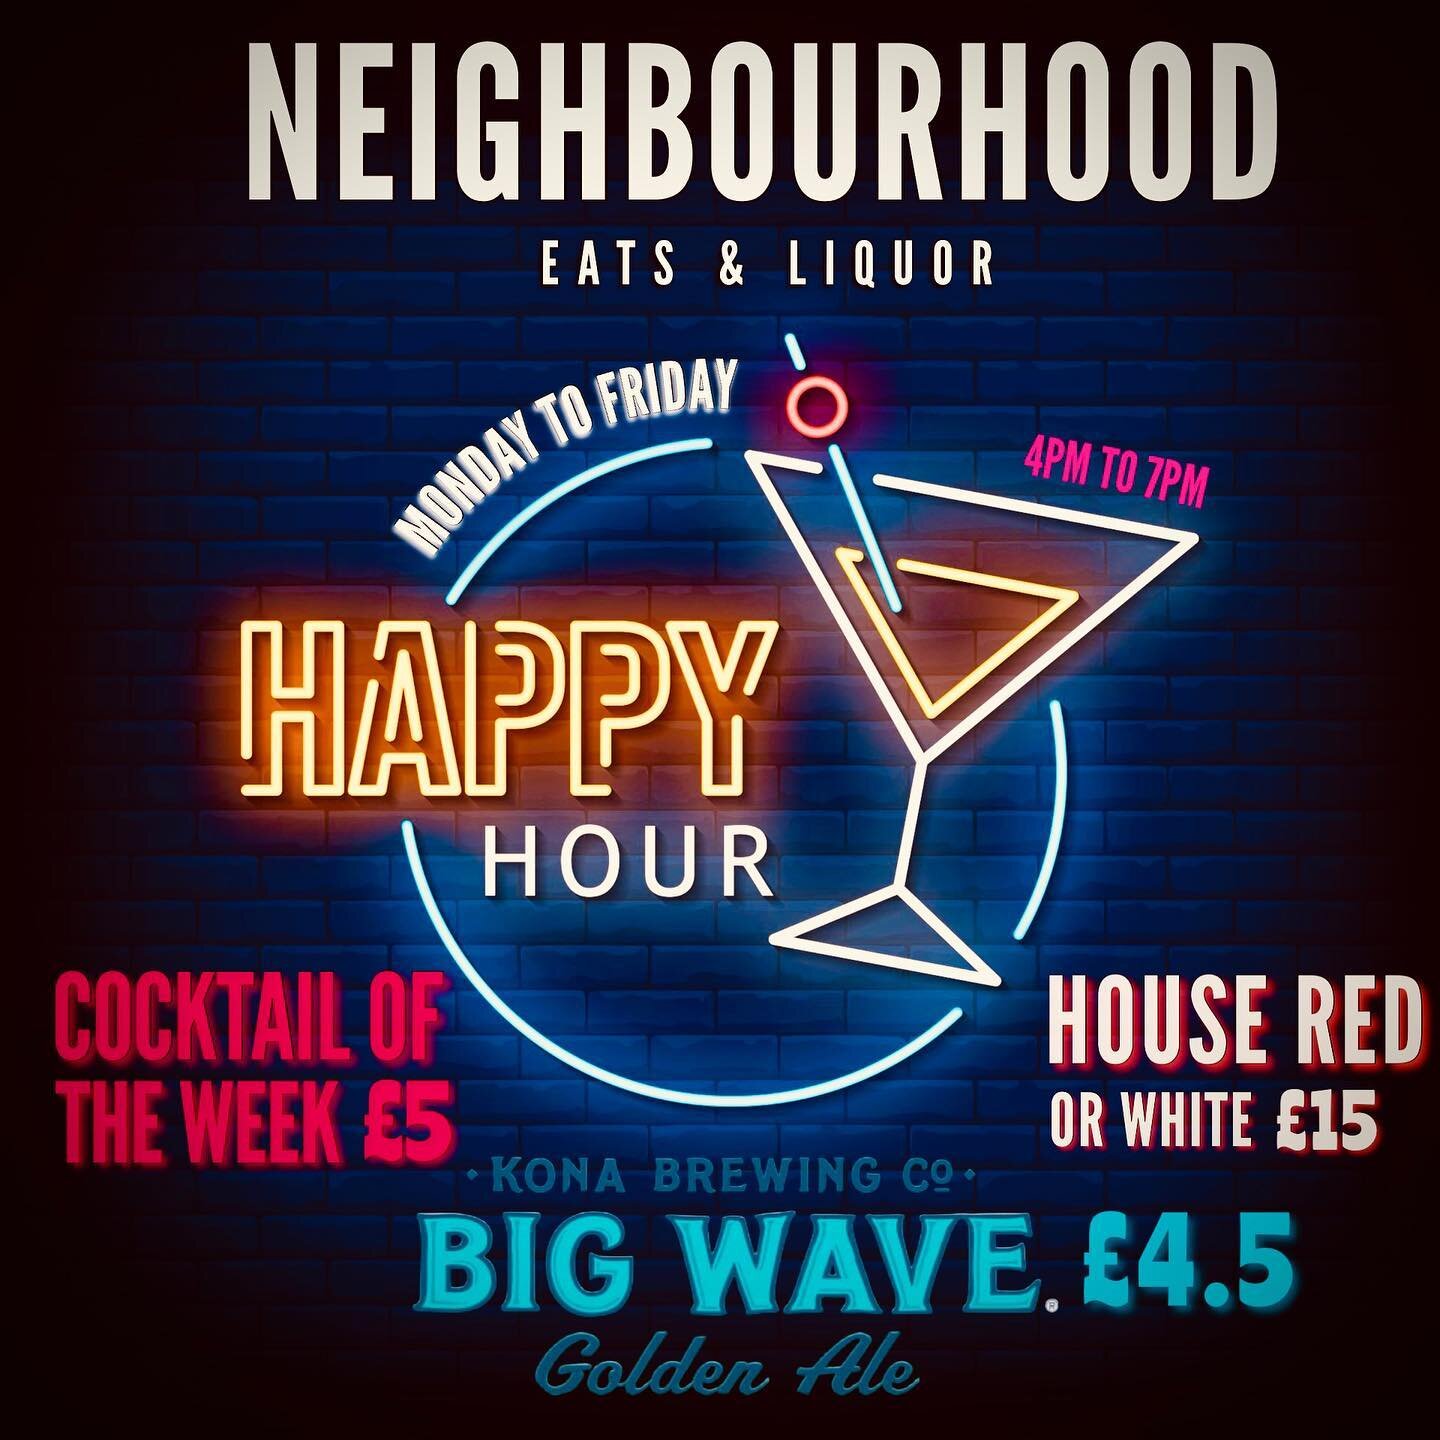 Our happy hour is from 4 to 7pm and this weeks special thanks to @Konabrewingco is Big Wave🍺
.
.
.
.
.
.
.
.
.
.
.
.
.
.
#beer #ipa #happyhour #tuesdaytofriday #didsbury #pubs #bars #manchester #drinks #cocktail #gin #redwine #whitewine
#cocktail #c